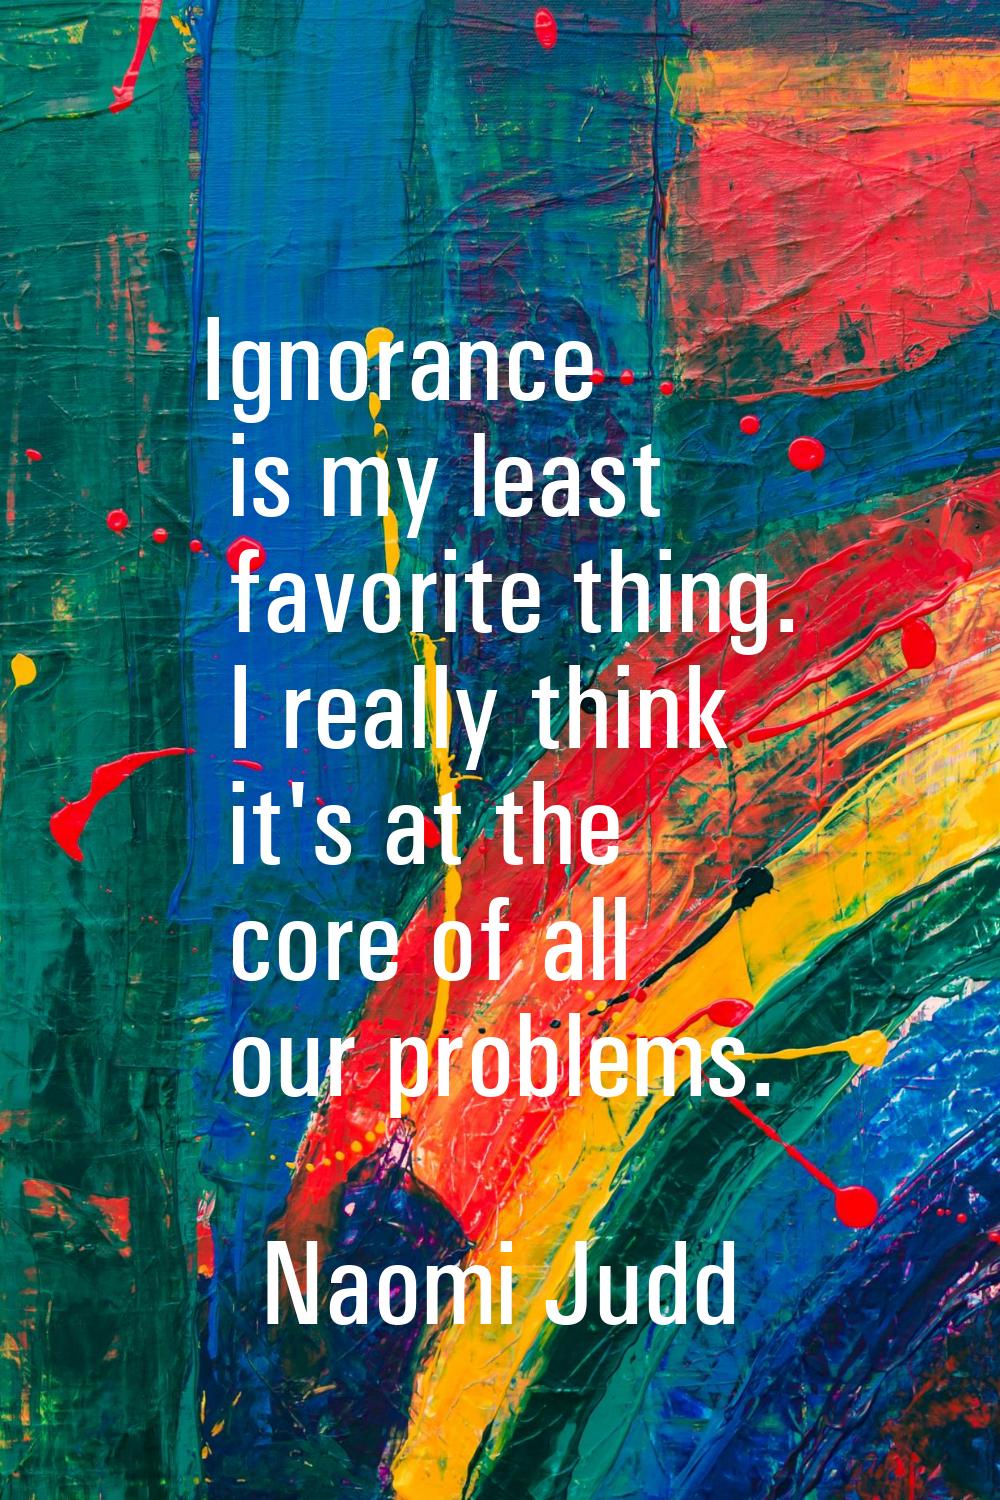 Ignorance is my least favorite thing. I really think it's at the core of all our problems.